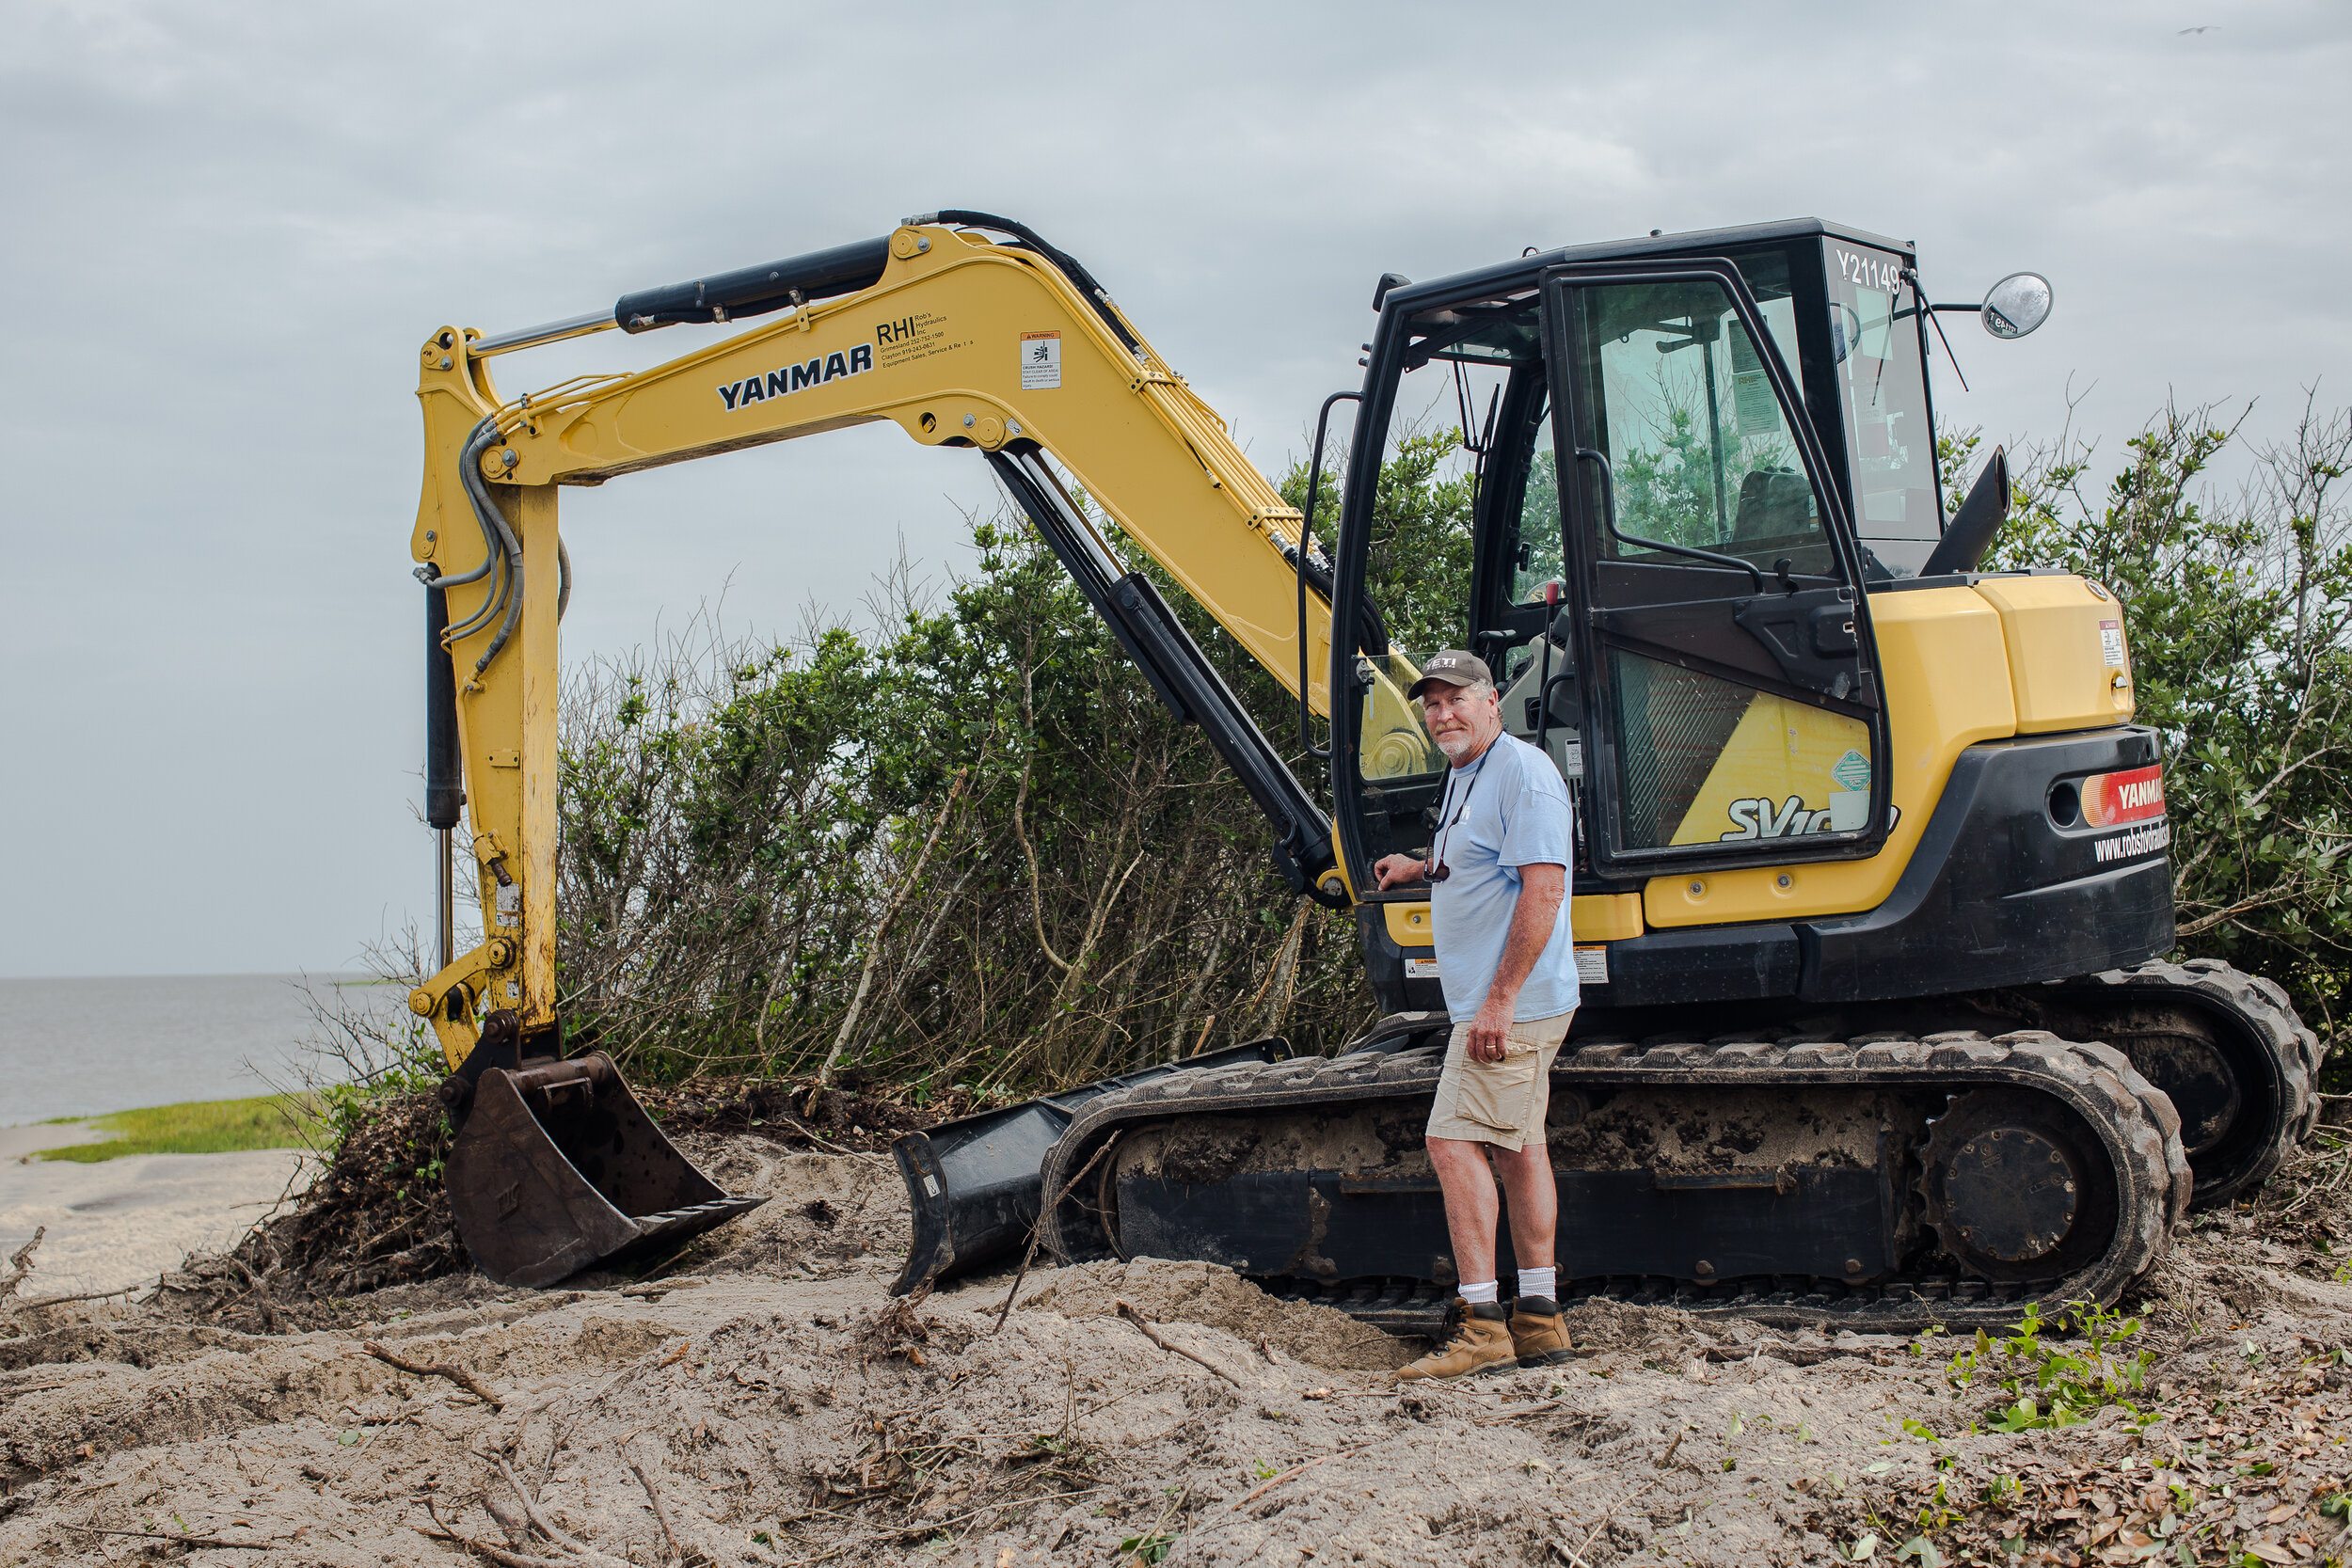  David “Cowboy” Ambrose poses with his backhoe. His marine construction company is building a bulkhead that will slow erosion between the sound and the Salvo Community Cemetery. Decades ago, he fell in love with the Outer Banks and never left. “Peopl